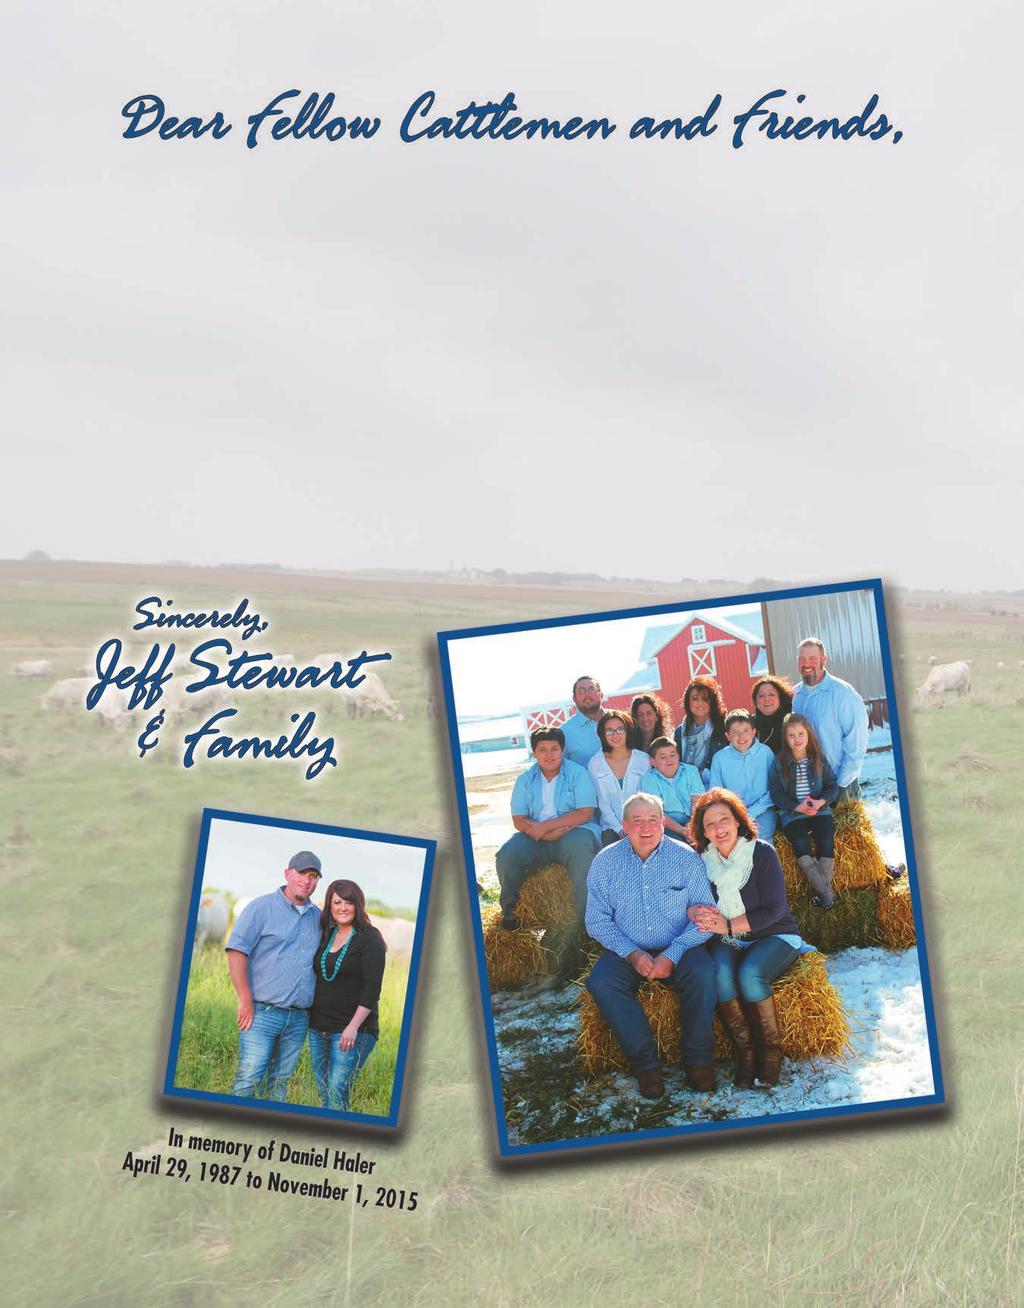 Words cannot express the gratitude our families have to the many friends we have met in the cattle industry.